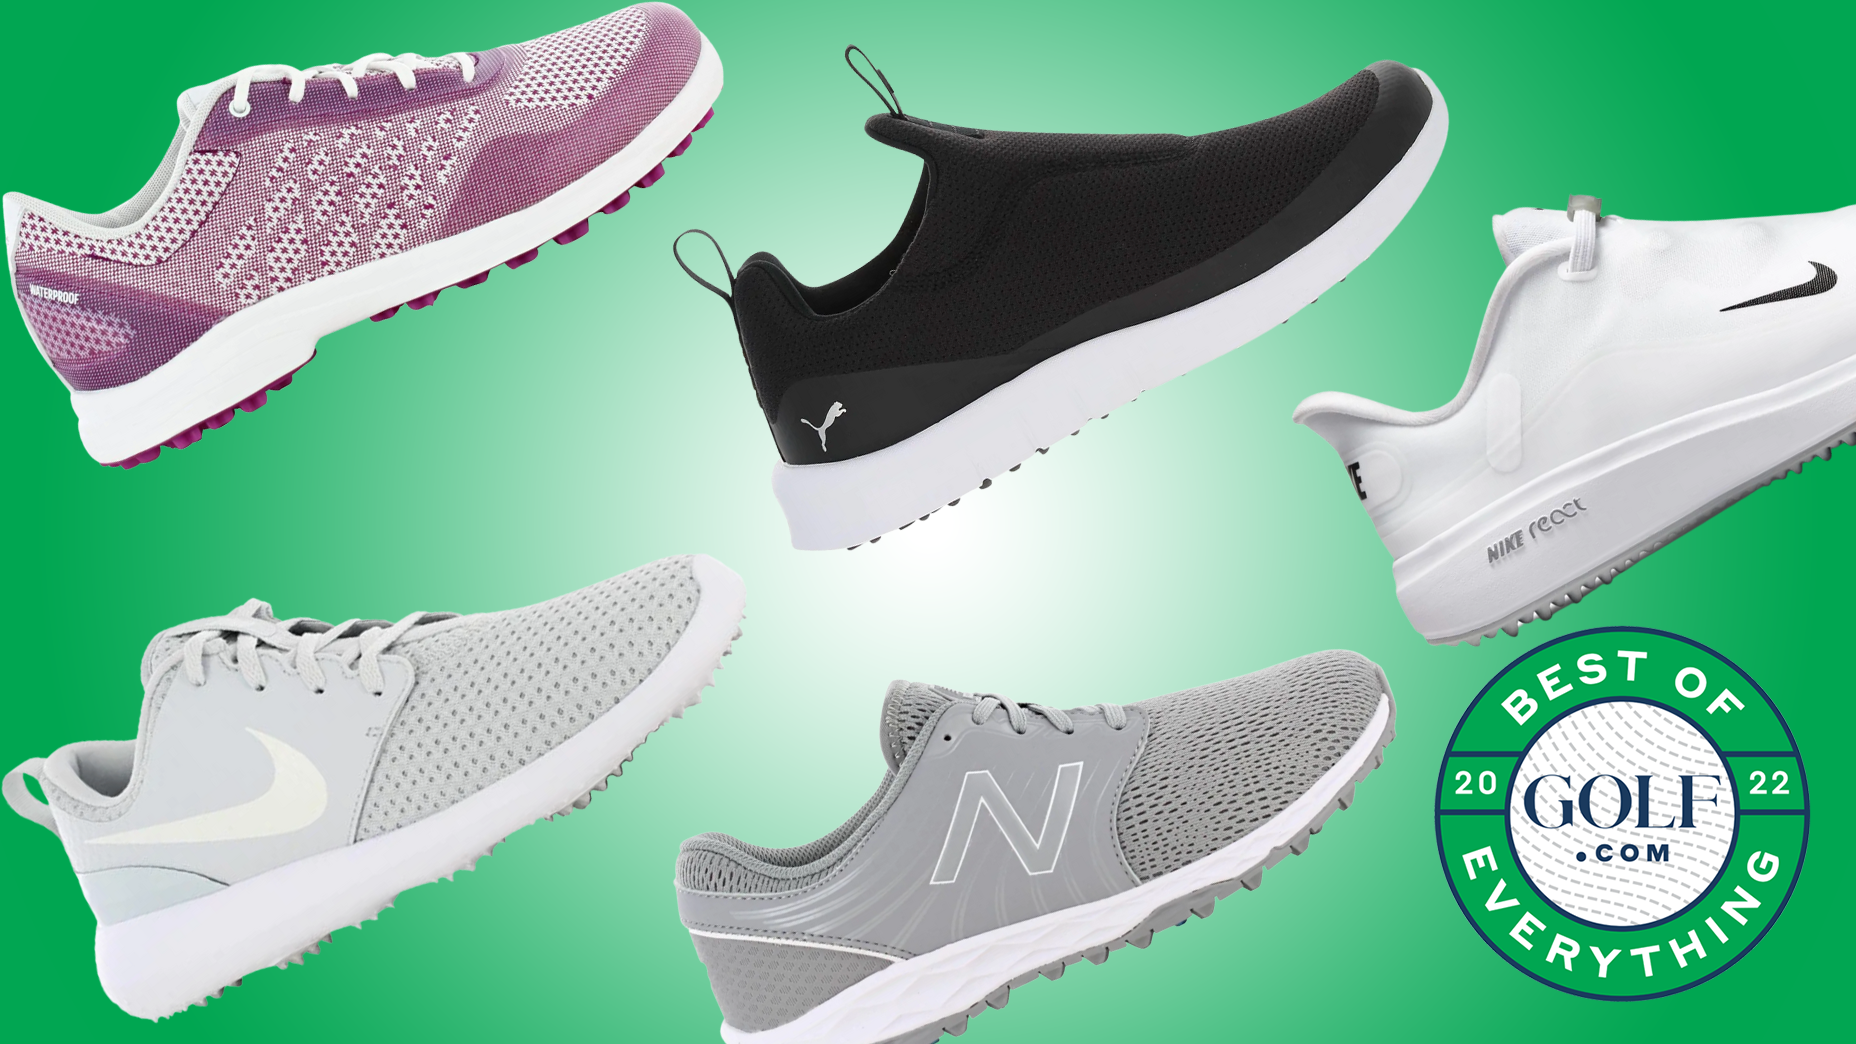 Best Golf Shoes 2022: Here are the 6 best men's golf shoes with spikes